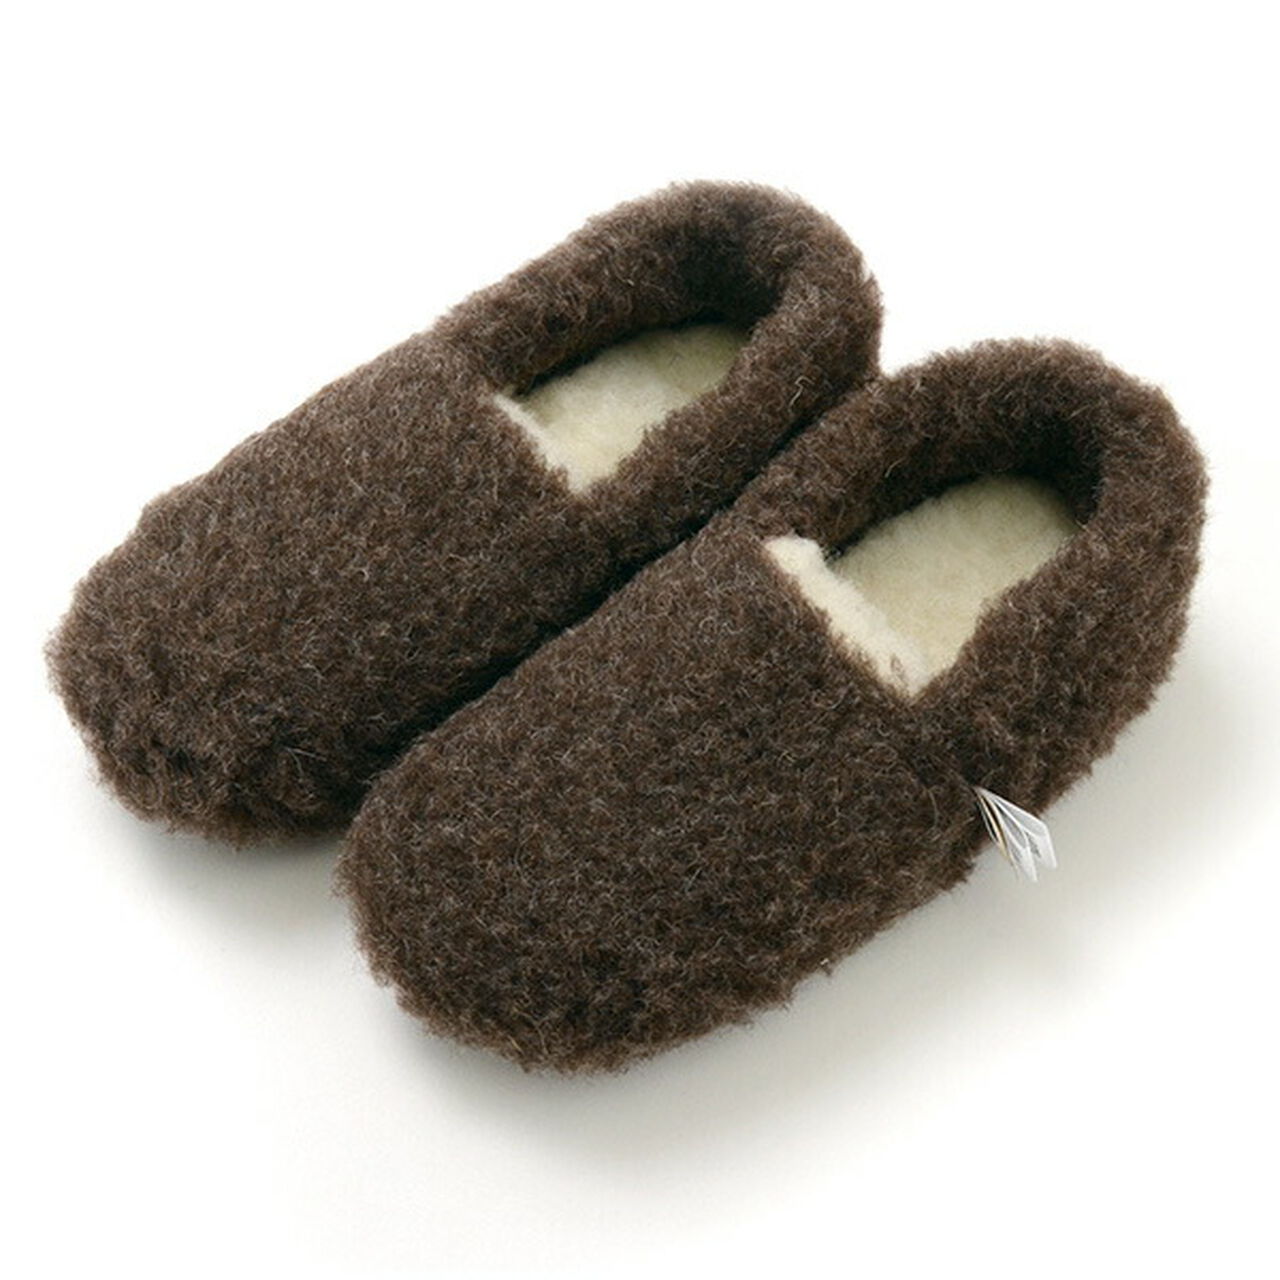 Boa Wool Shorty Slippers,DarkBrown, large image number 0